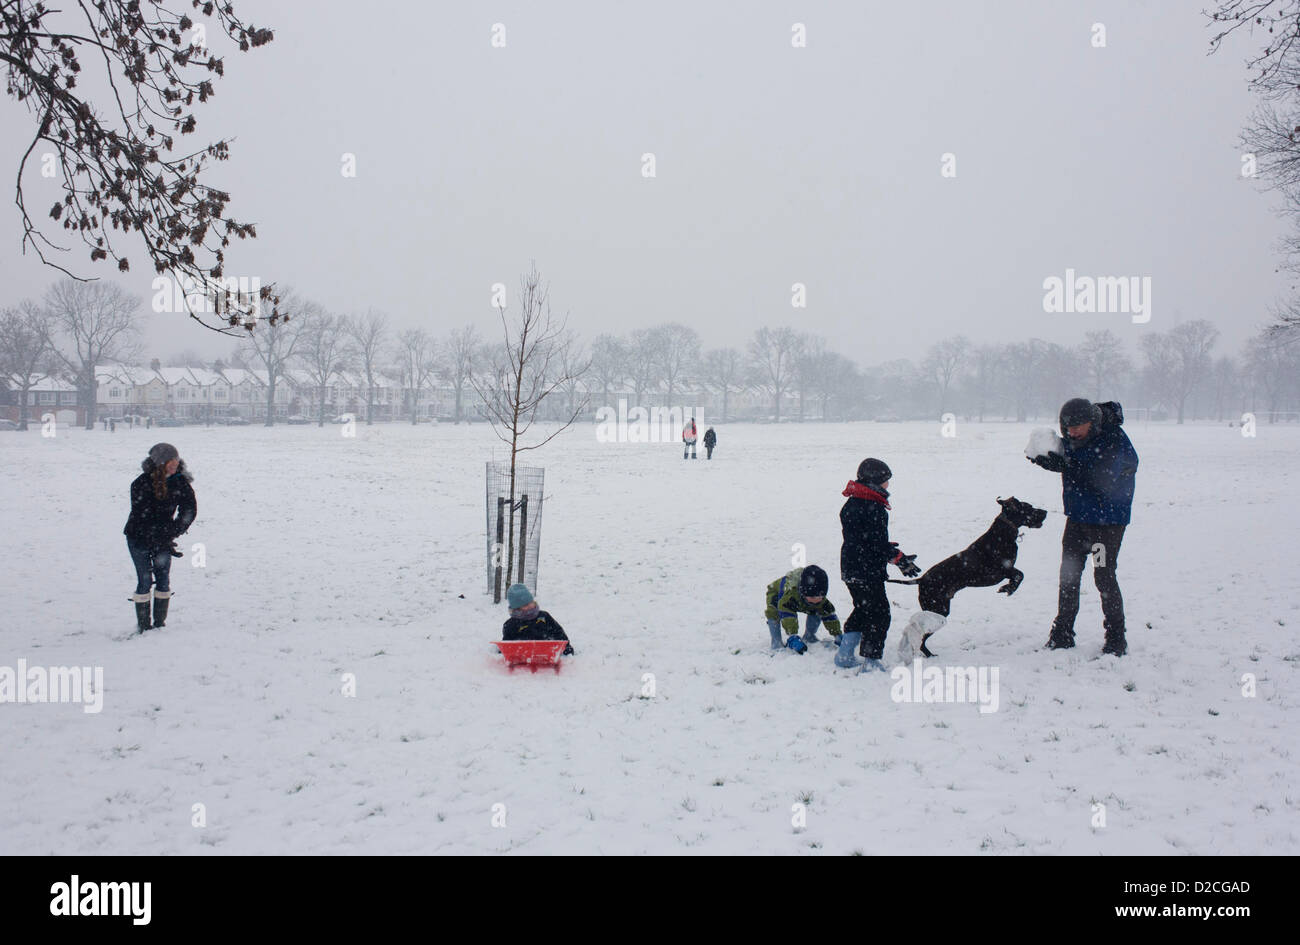 A family out in the snow enjoy a winter's day with their pet dog in a snowbound south London park. During a prolonged cold spell of bad weather, snow fell continuously on the capital on Sunday, allowing families the chance to enjoy the bleak conditions, here in Ruskin Park in the borough of Lambeth, London England. The family pet dog jumps and leaps in the soft snow that is still falling while the kids are throwing a large snowball to each other - trying not to splatter themselves as they each catch the snowy sphere. Edwardian period homes can be seen in the background  beneath 100 year-old as Stock Photo